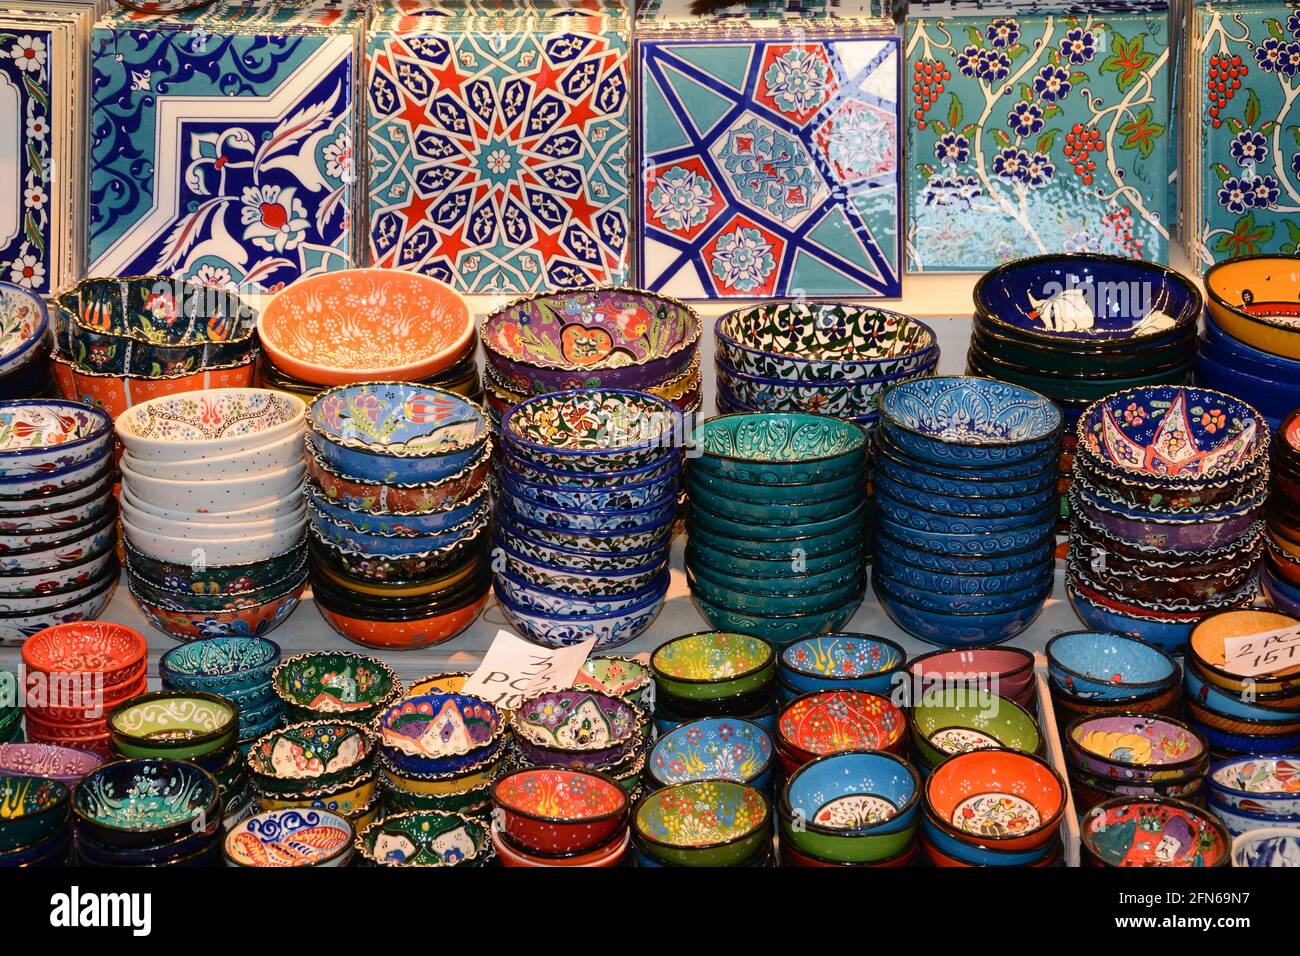 Bright and colourful display of Turkish ceramic bowls and tiles inside the  Grand Bazaar in Istanbul Stock Photo - Alamy